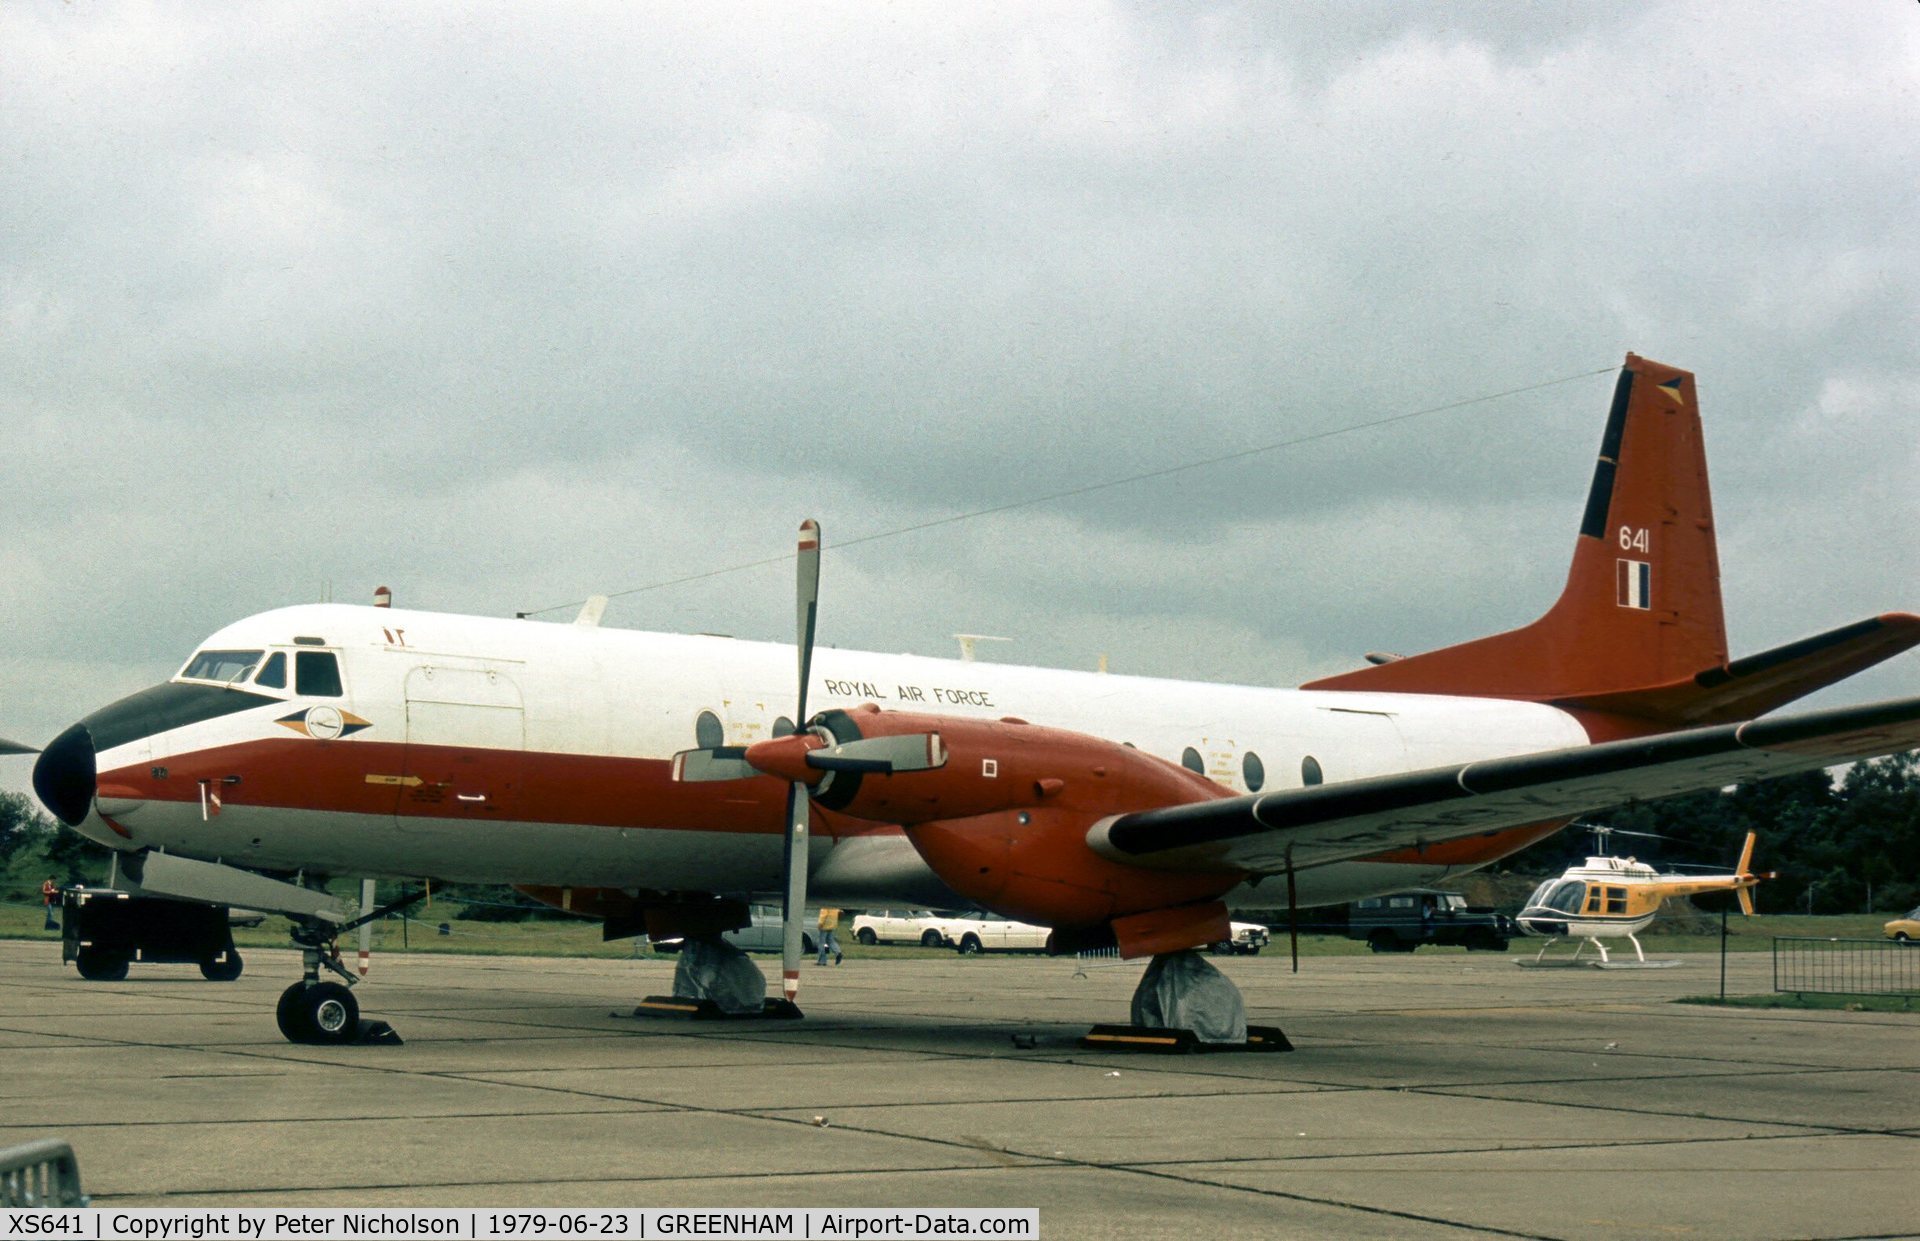 XS641, 1967 Hawker Siddeley HS-780 Andover C1(PR) C/N Set25/BN25, Andover C.1 of 115 Squadron at the 1979 Intnl Air Tattoo at RAF Greenham Common.